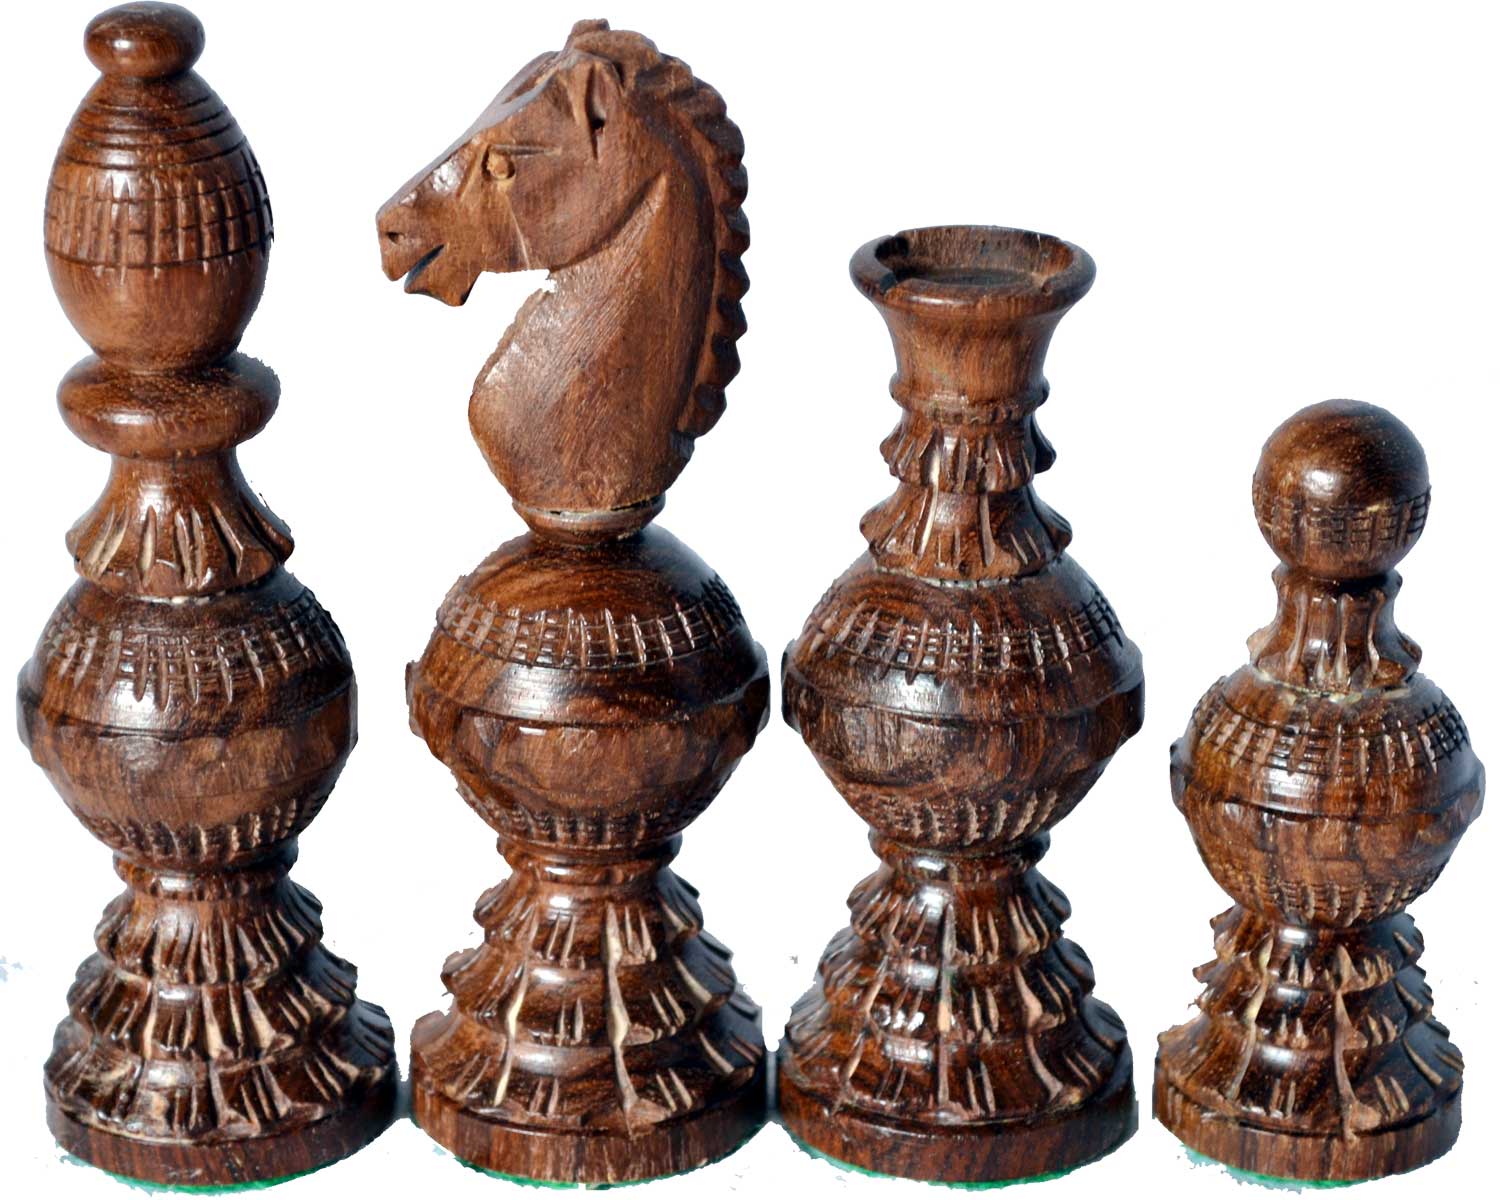 Azacus Brand Weighted Globe Design Rosewood Chess Set King Height 5"